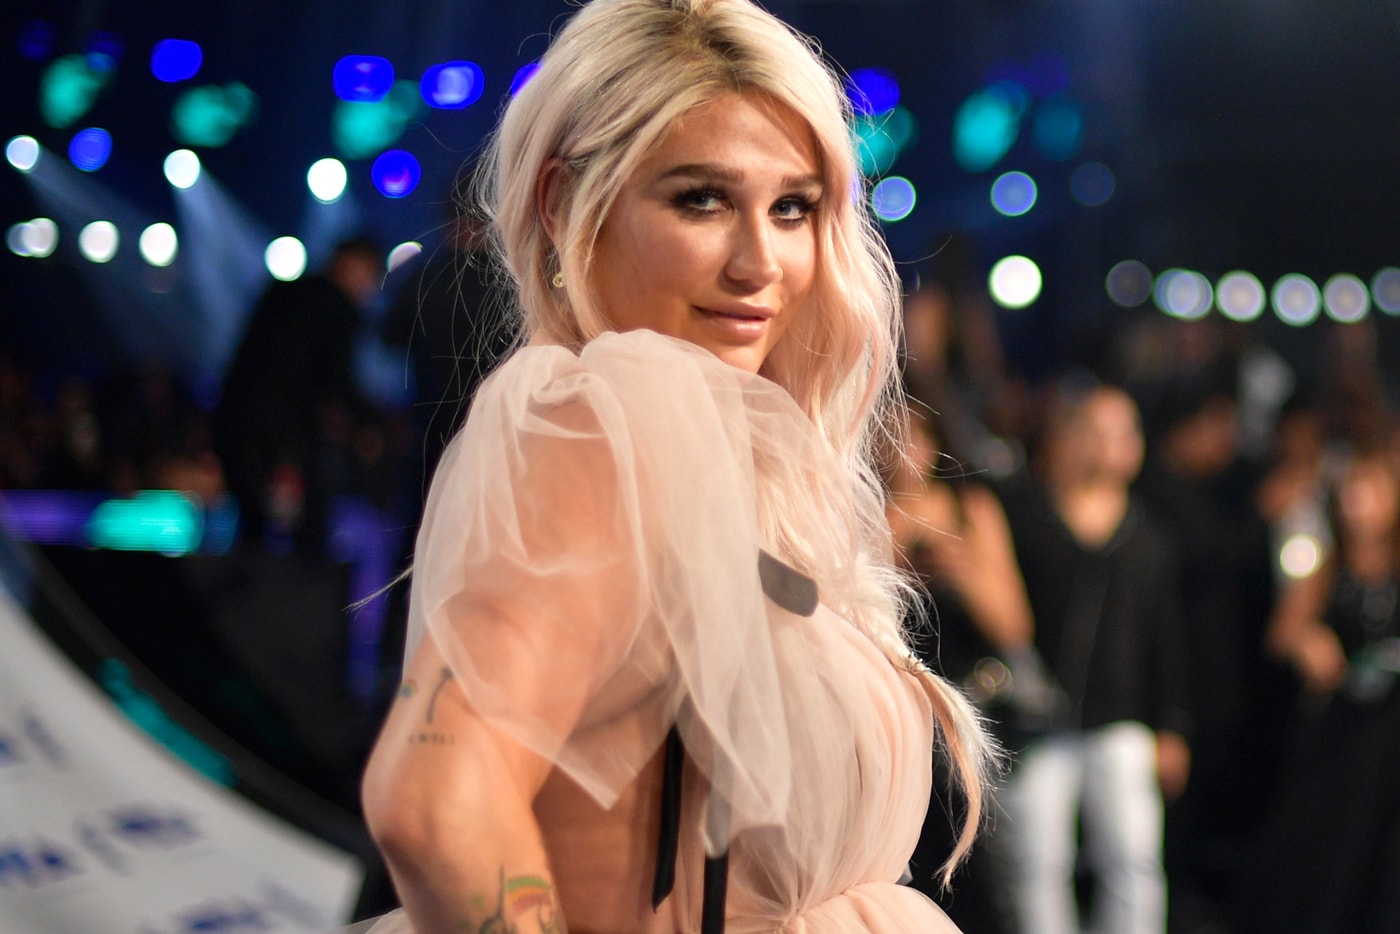 kesha-was-offered-her-freedom-if-she-apologized-for-rape-allegations